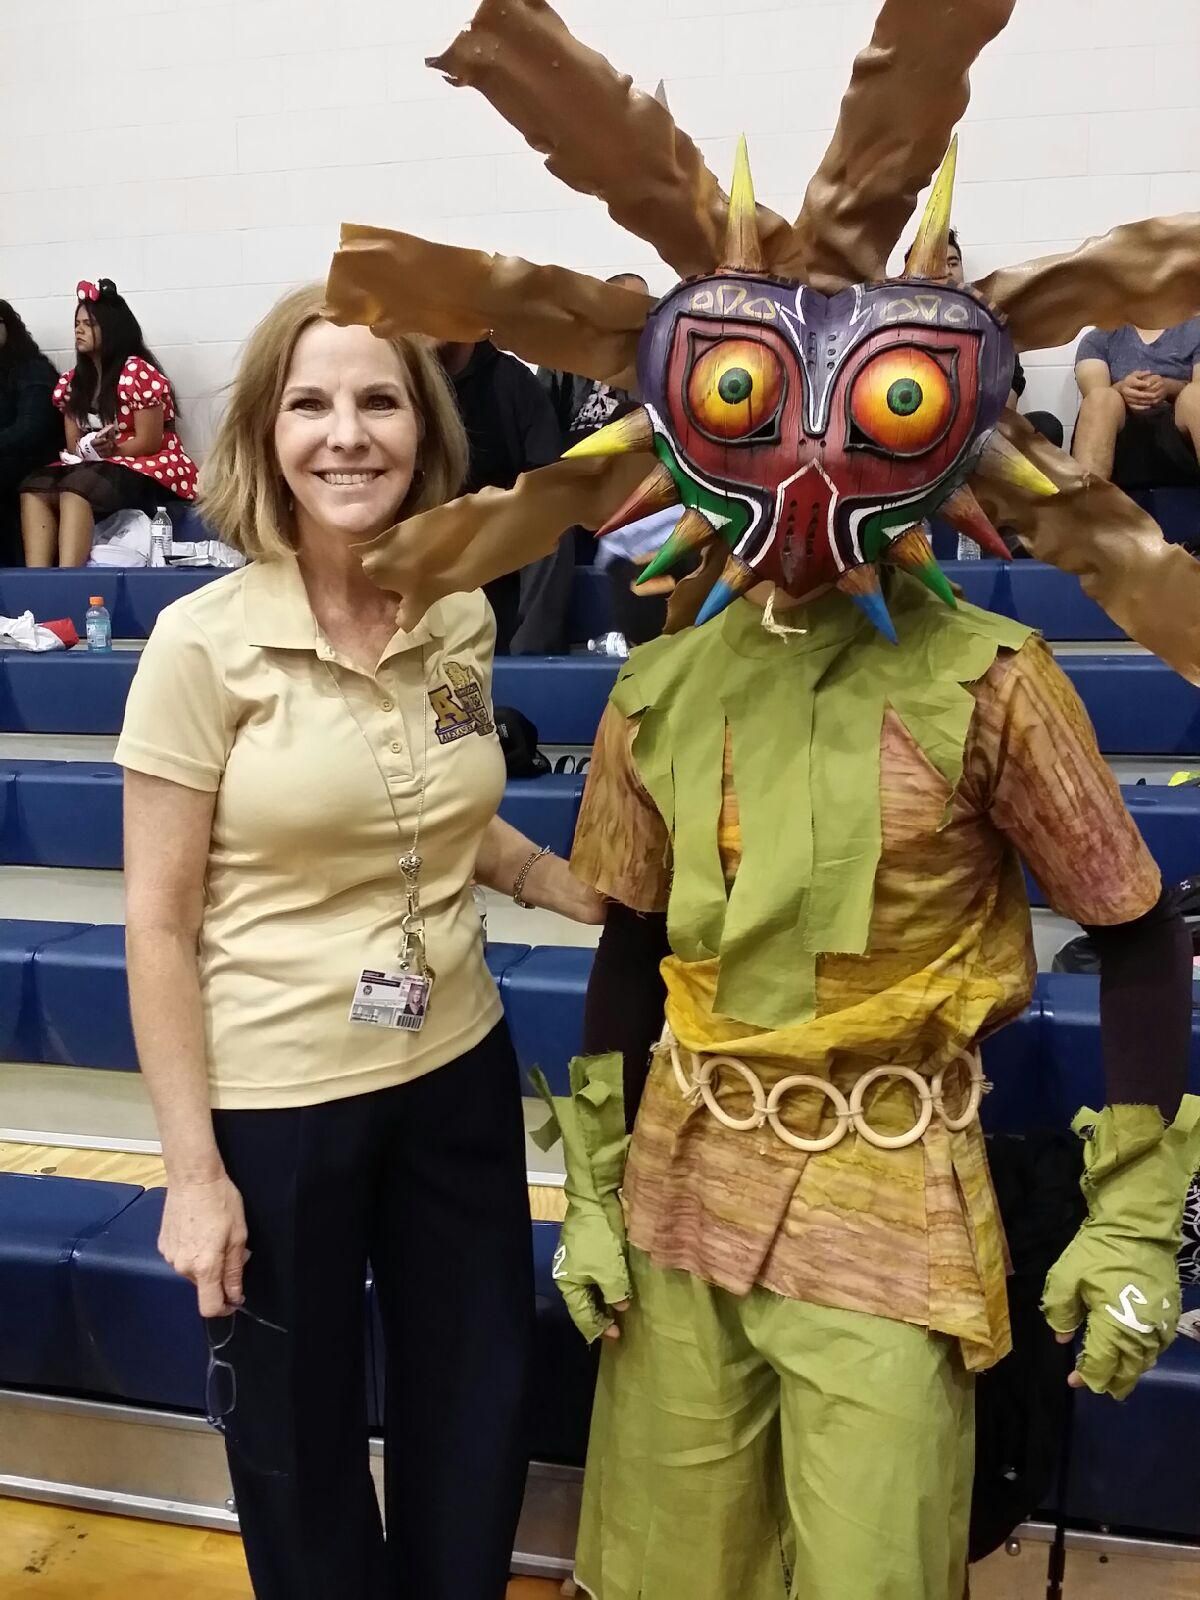 Absolutely amazing Skull Kid costume from a high school senior for spirit week.